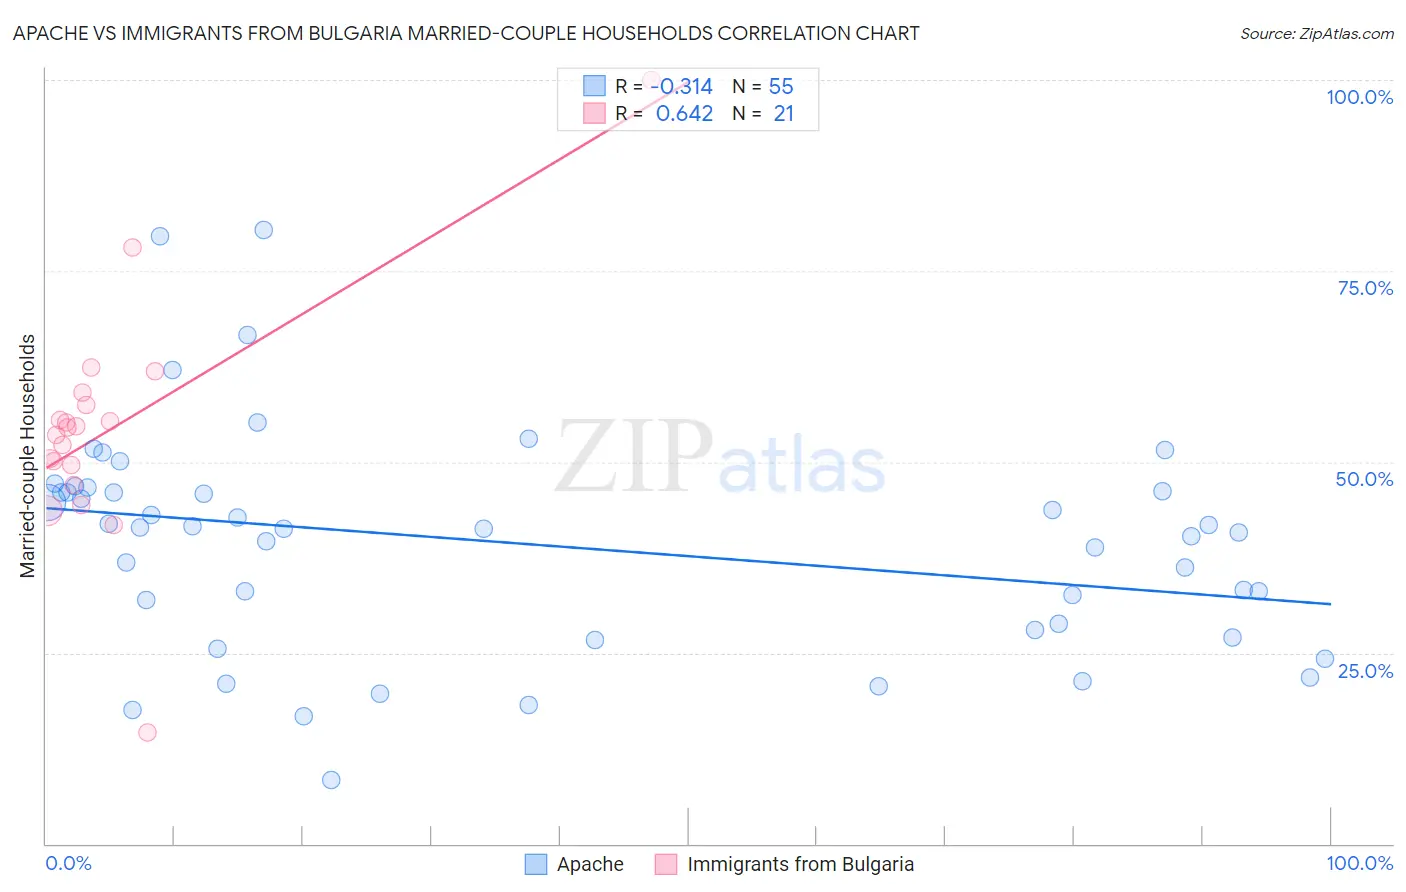 Apache vs Immigrants from Bulgaria Married-couple Households